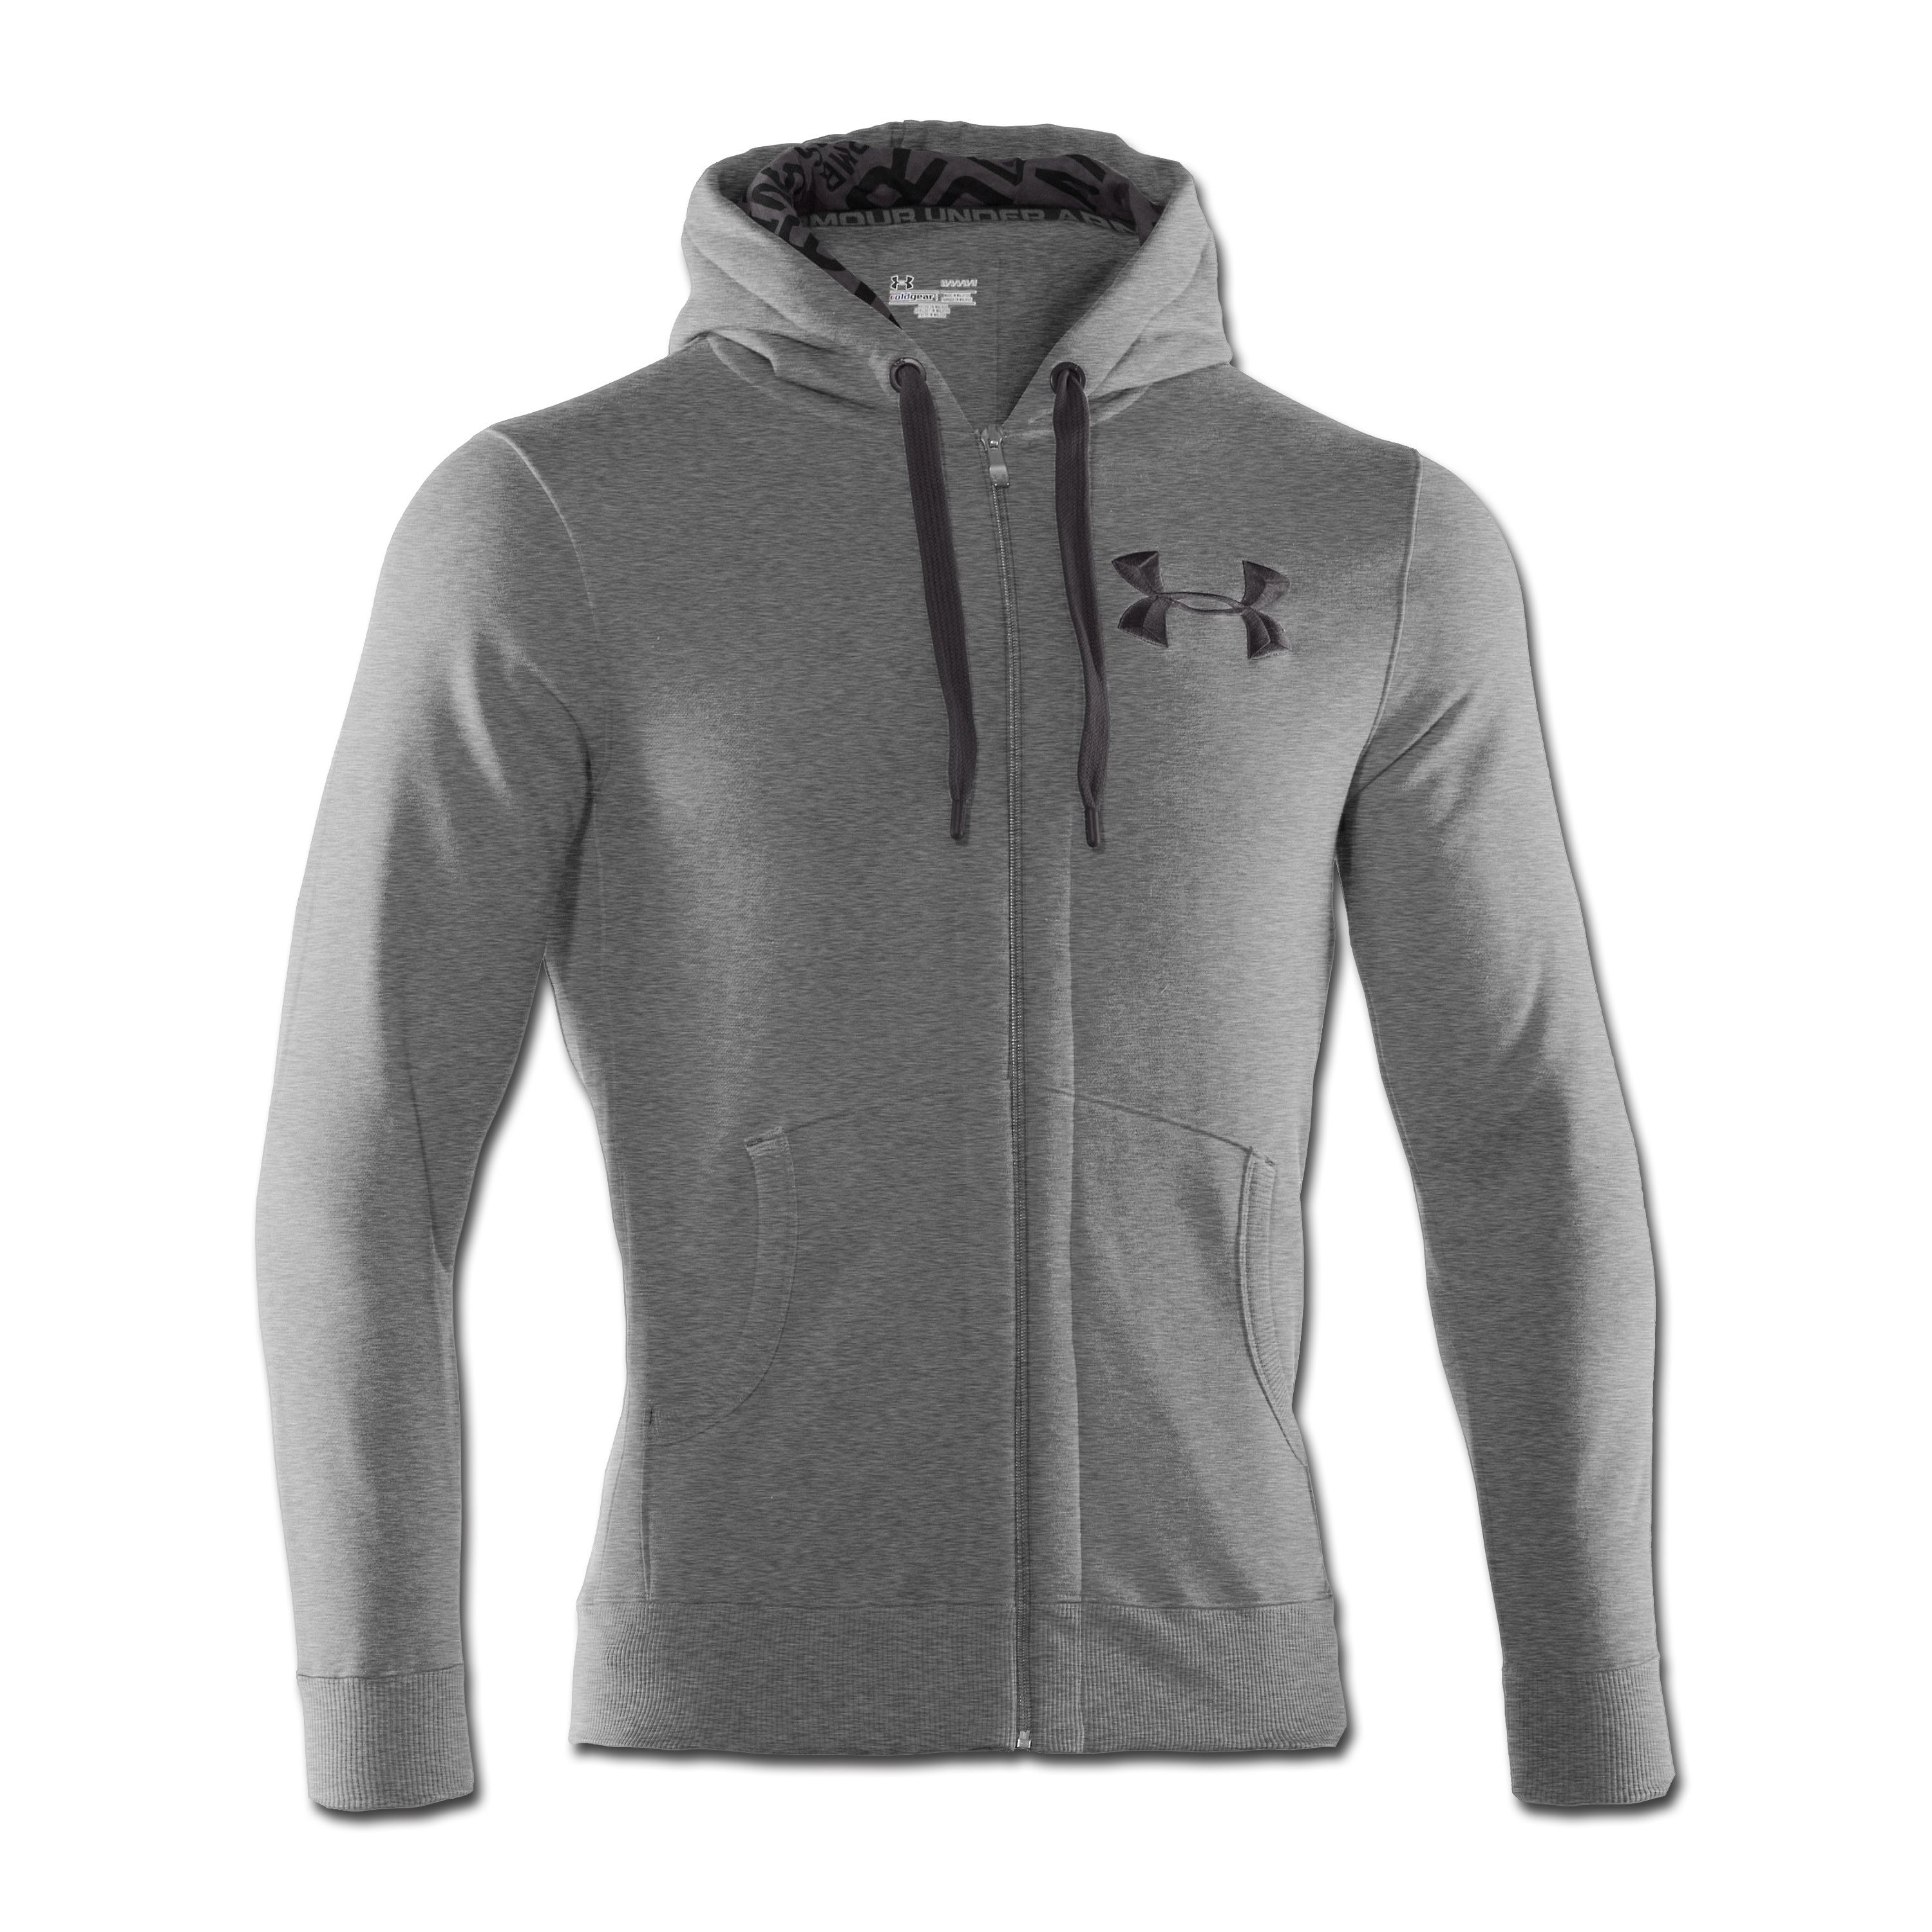 Under Armour Hoodie Storm Cold Gear grey | Under Armour Hoodie Storm ...